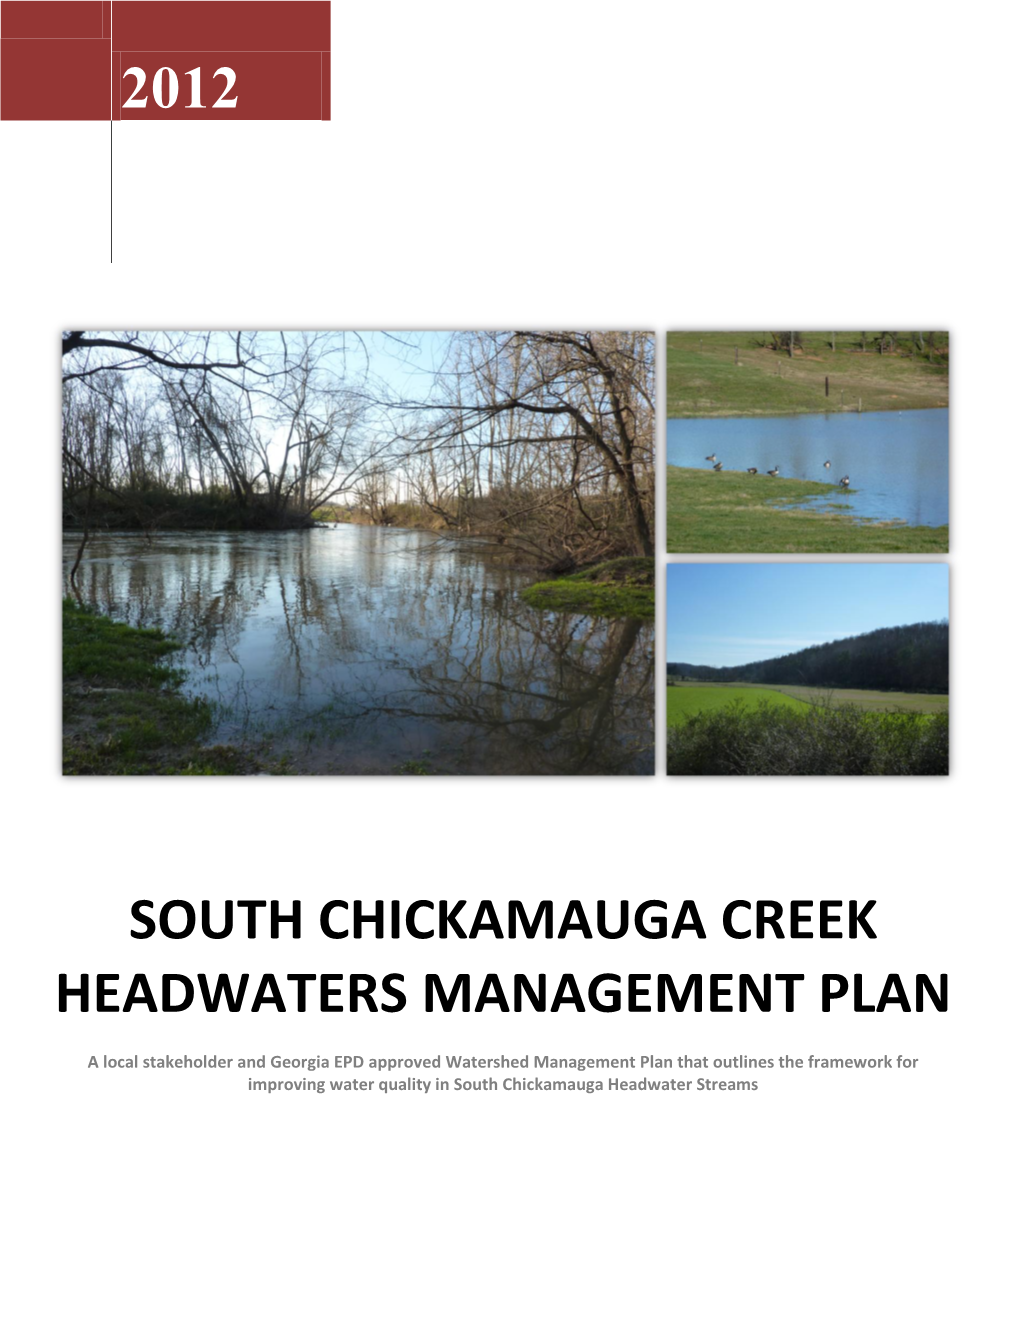 South Chickamauga Creek Headwaters Management Plan